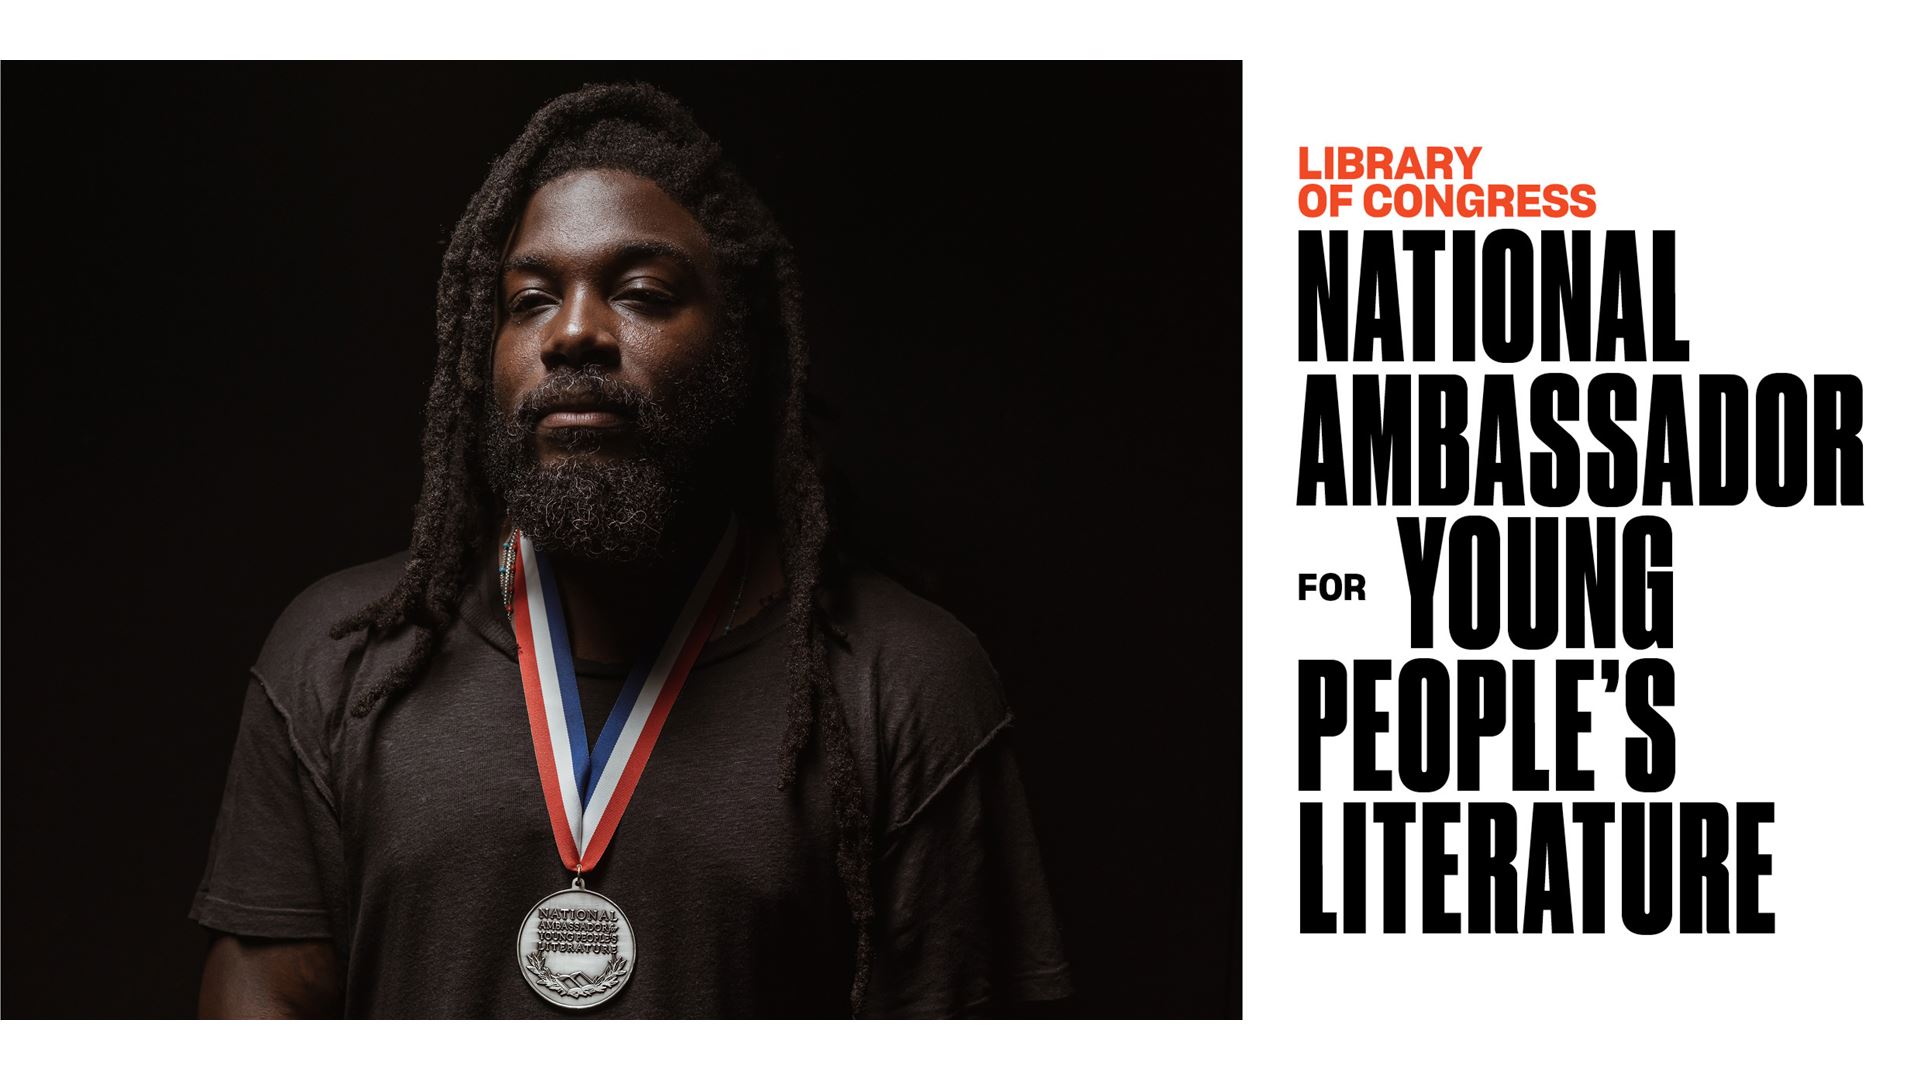 Library to Celebrate Jason Reynolds’ Three Years as National Ambassador for Young People’s Literature